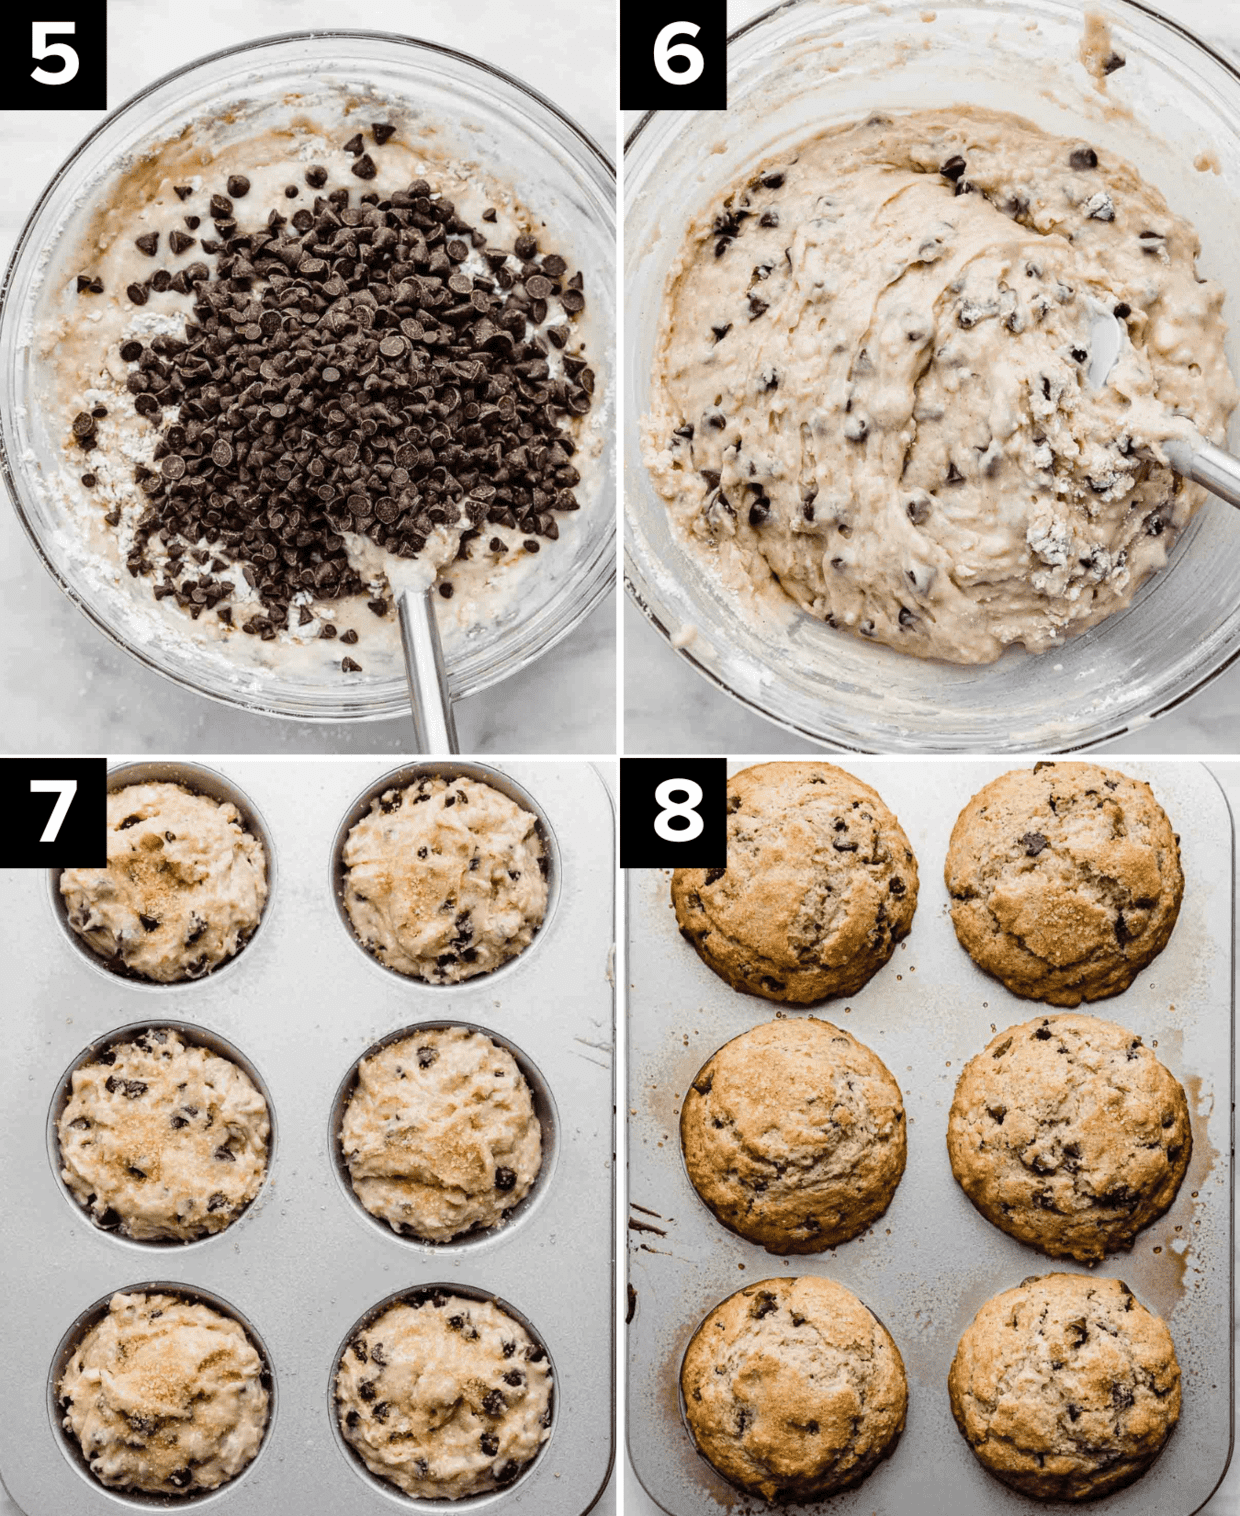 Four images, top left image is chocolate chips over muffin batter, top right image is chocolate chip muffin batter in a glass bowl. Bottom left image is unbaked Bakery Style Chocolate Chip Muffins in jumbo muffin tin, and bottom right image is Bakery Style Chocolate Chip Muffins in a six jumbo muffin tin.